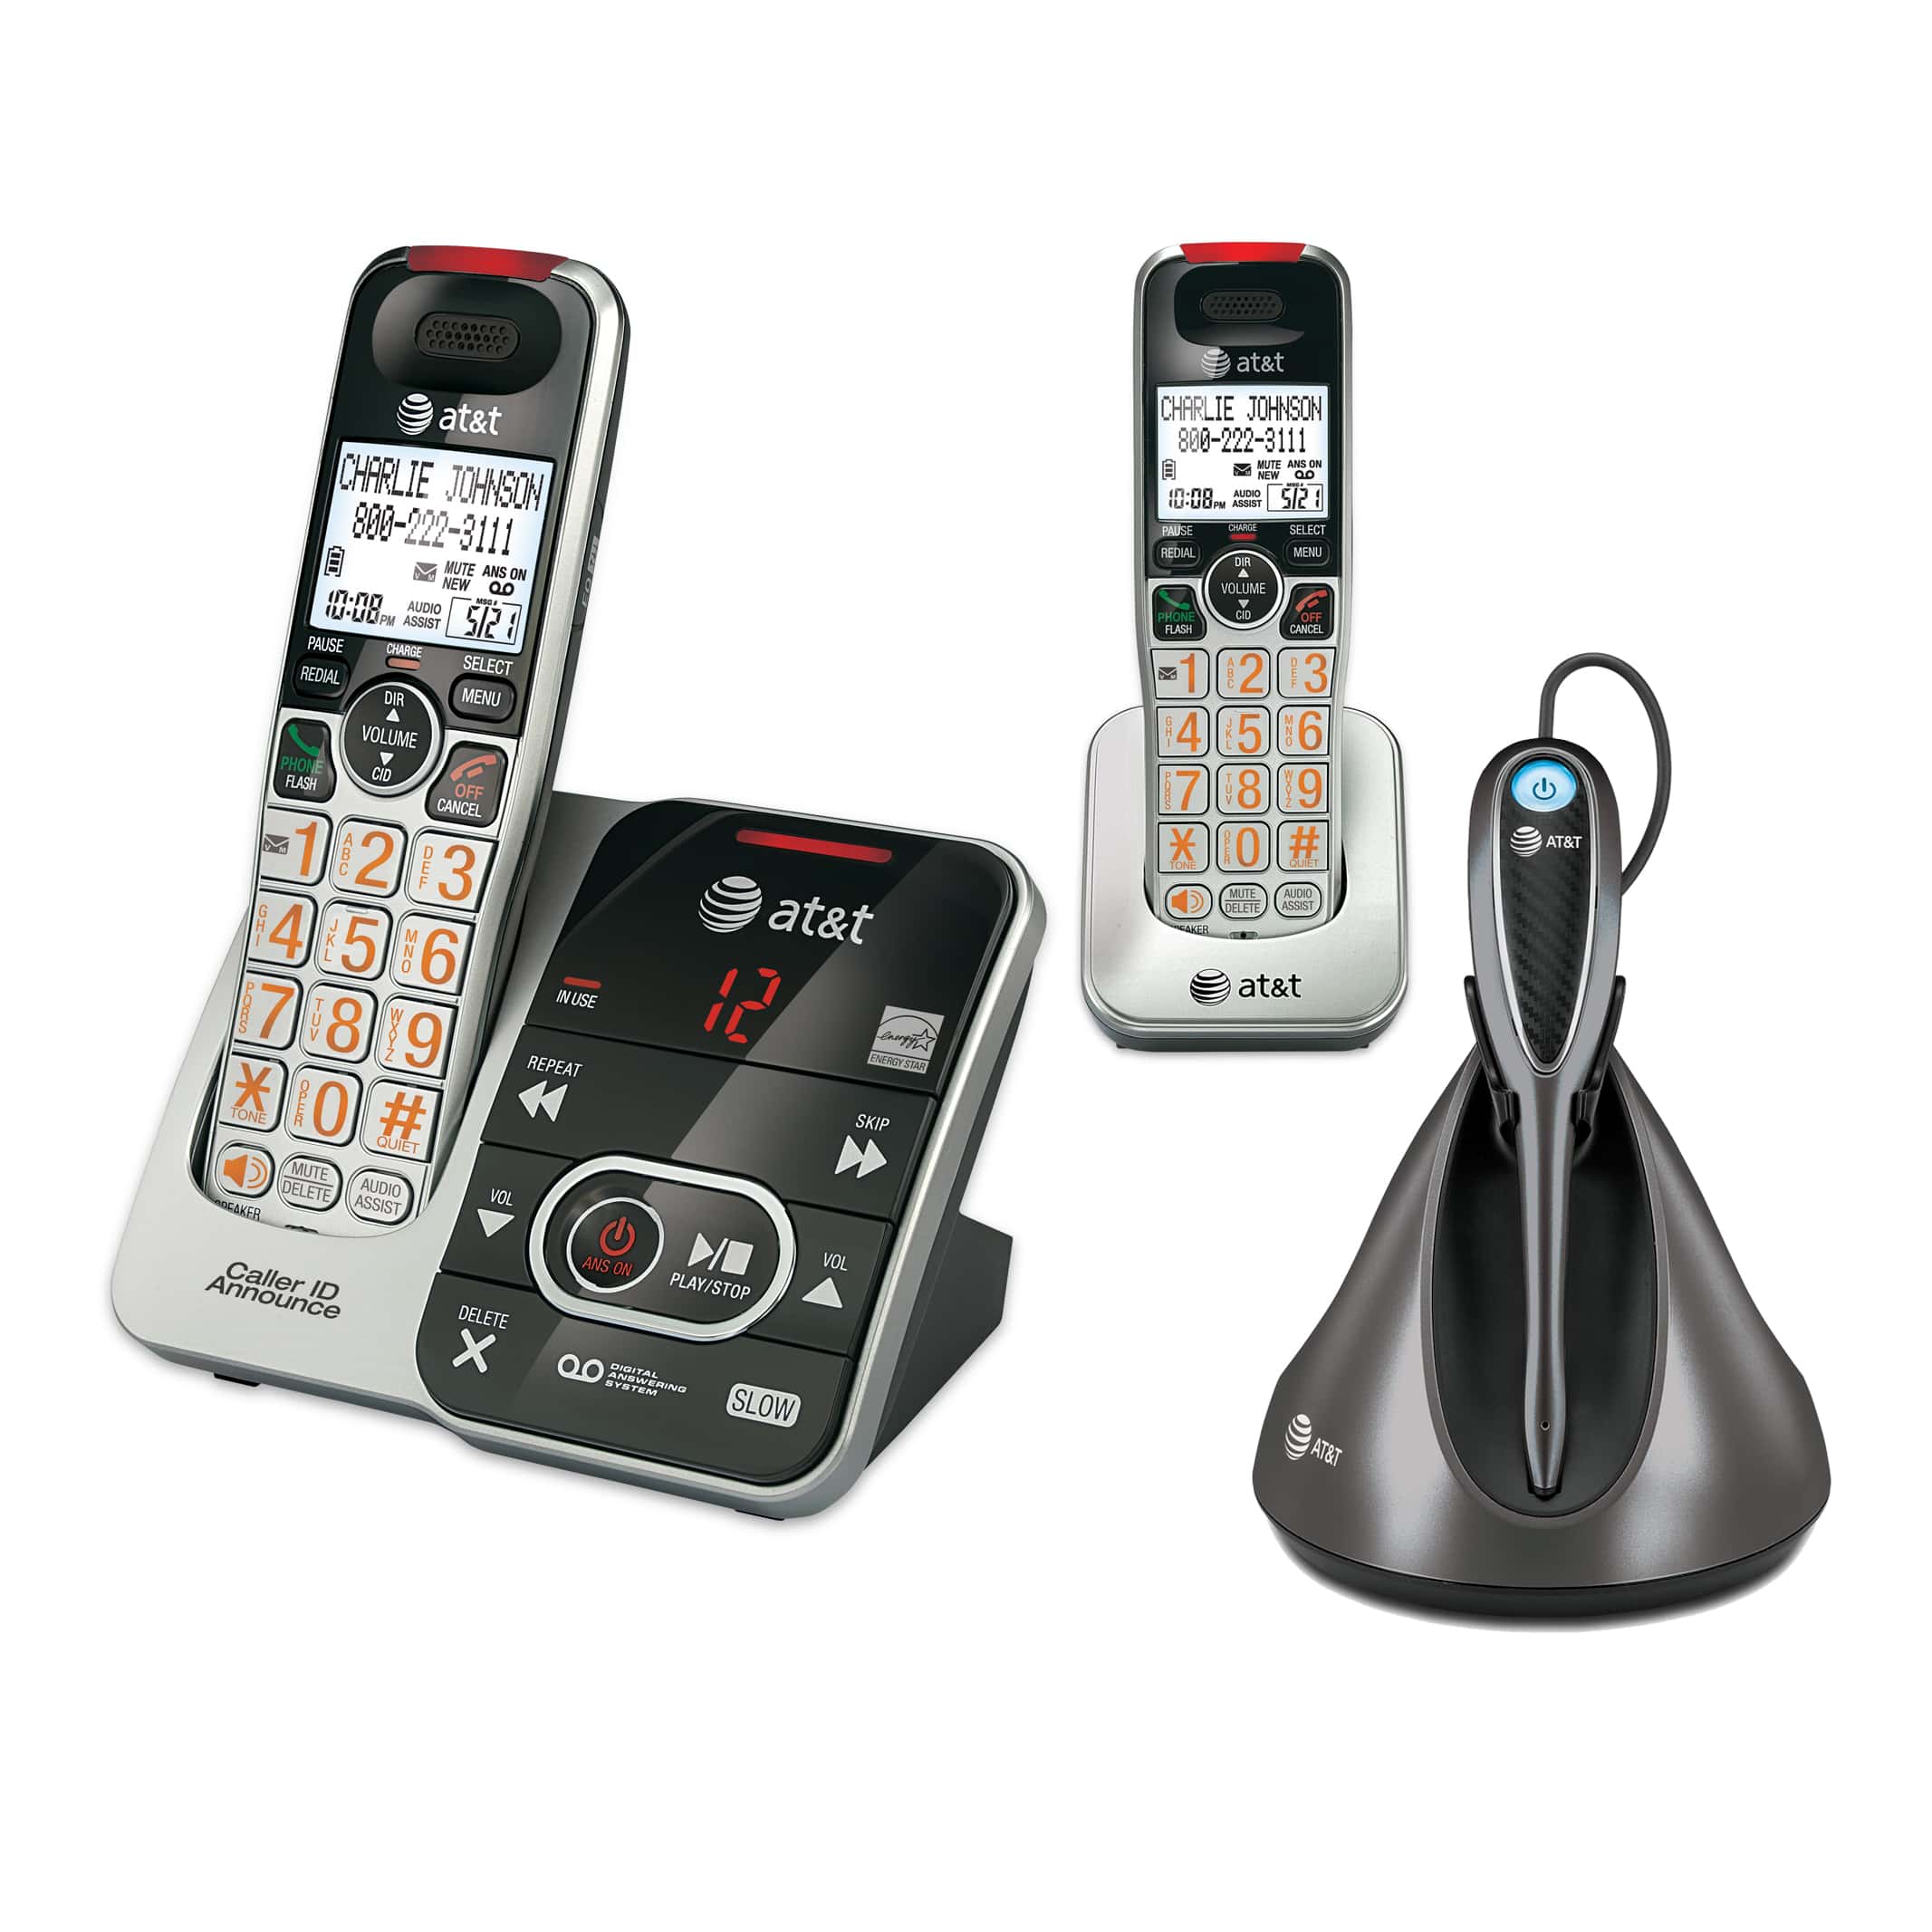 AT&T TL8900 DECT 6.0 Cordless Headset for AT&T Cordless Telephones with Noise Canceling Microphone